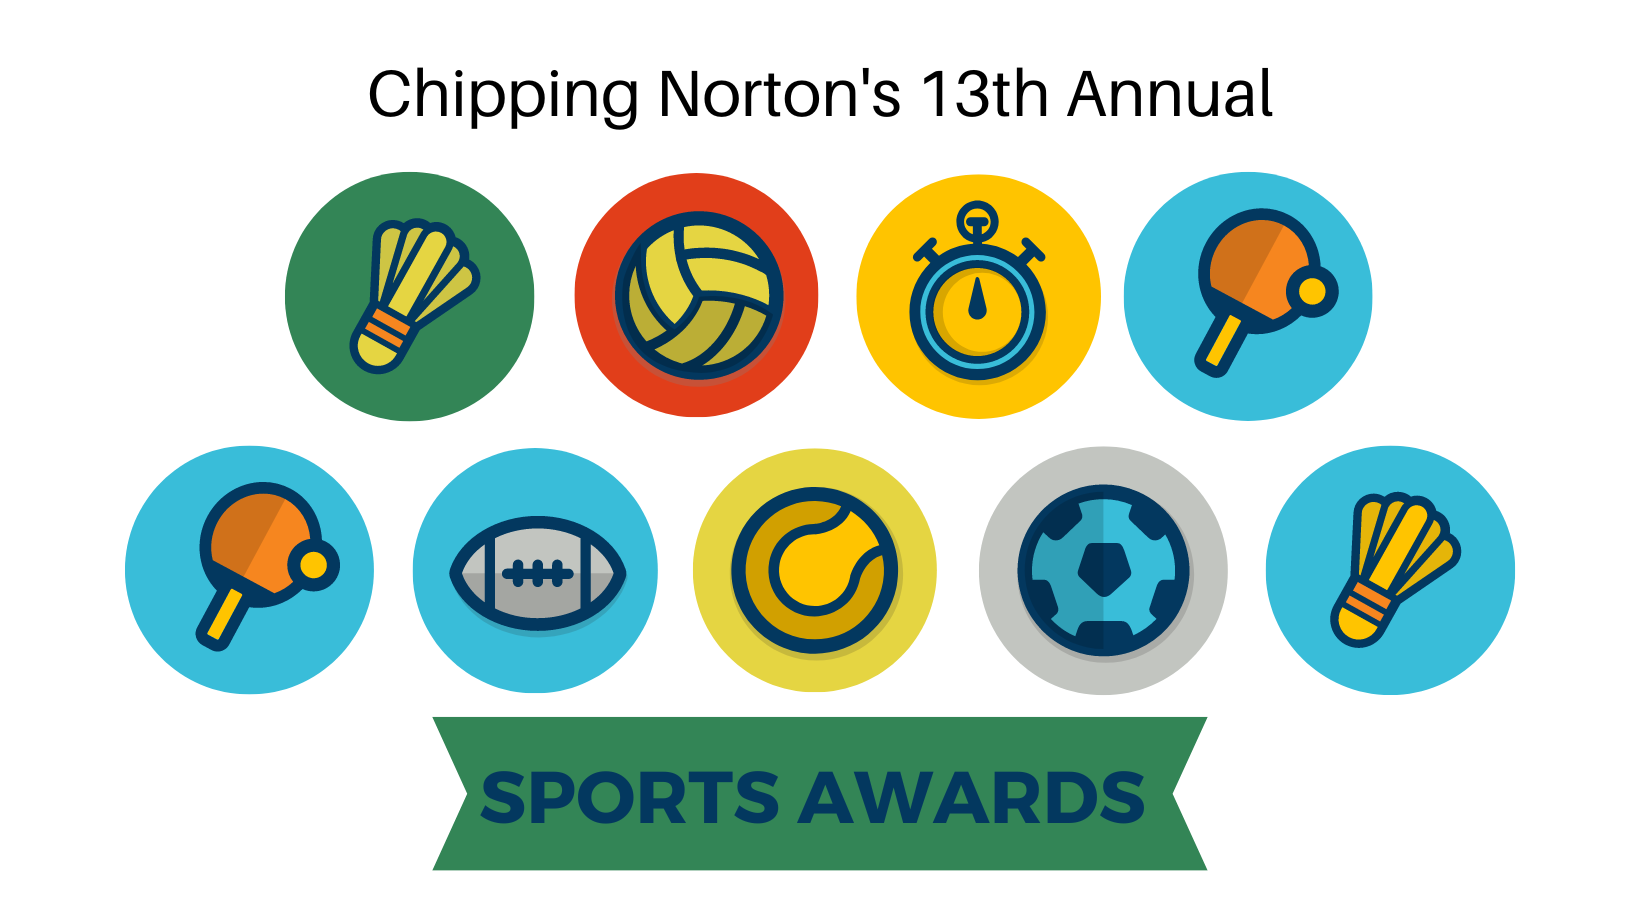 Chipping Norton's 13th Annual Sports Awards
Graphic 